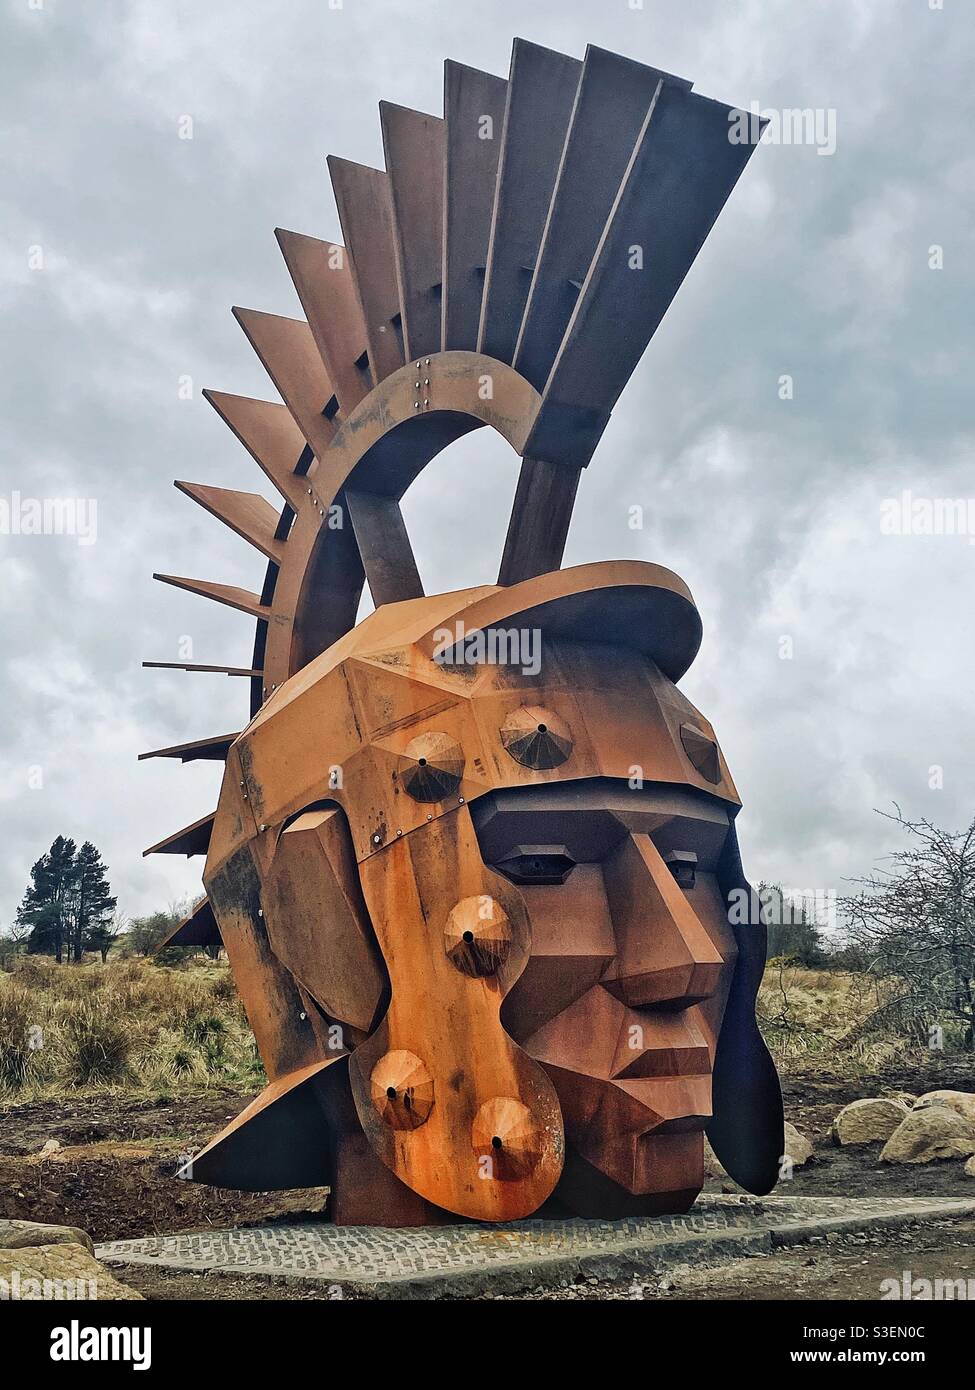 The 5 metre tall sculpture of a Roman soldier “Silvanus” on the route of the Antonine Wall in Croy, Scotland Stock Photo